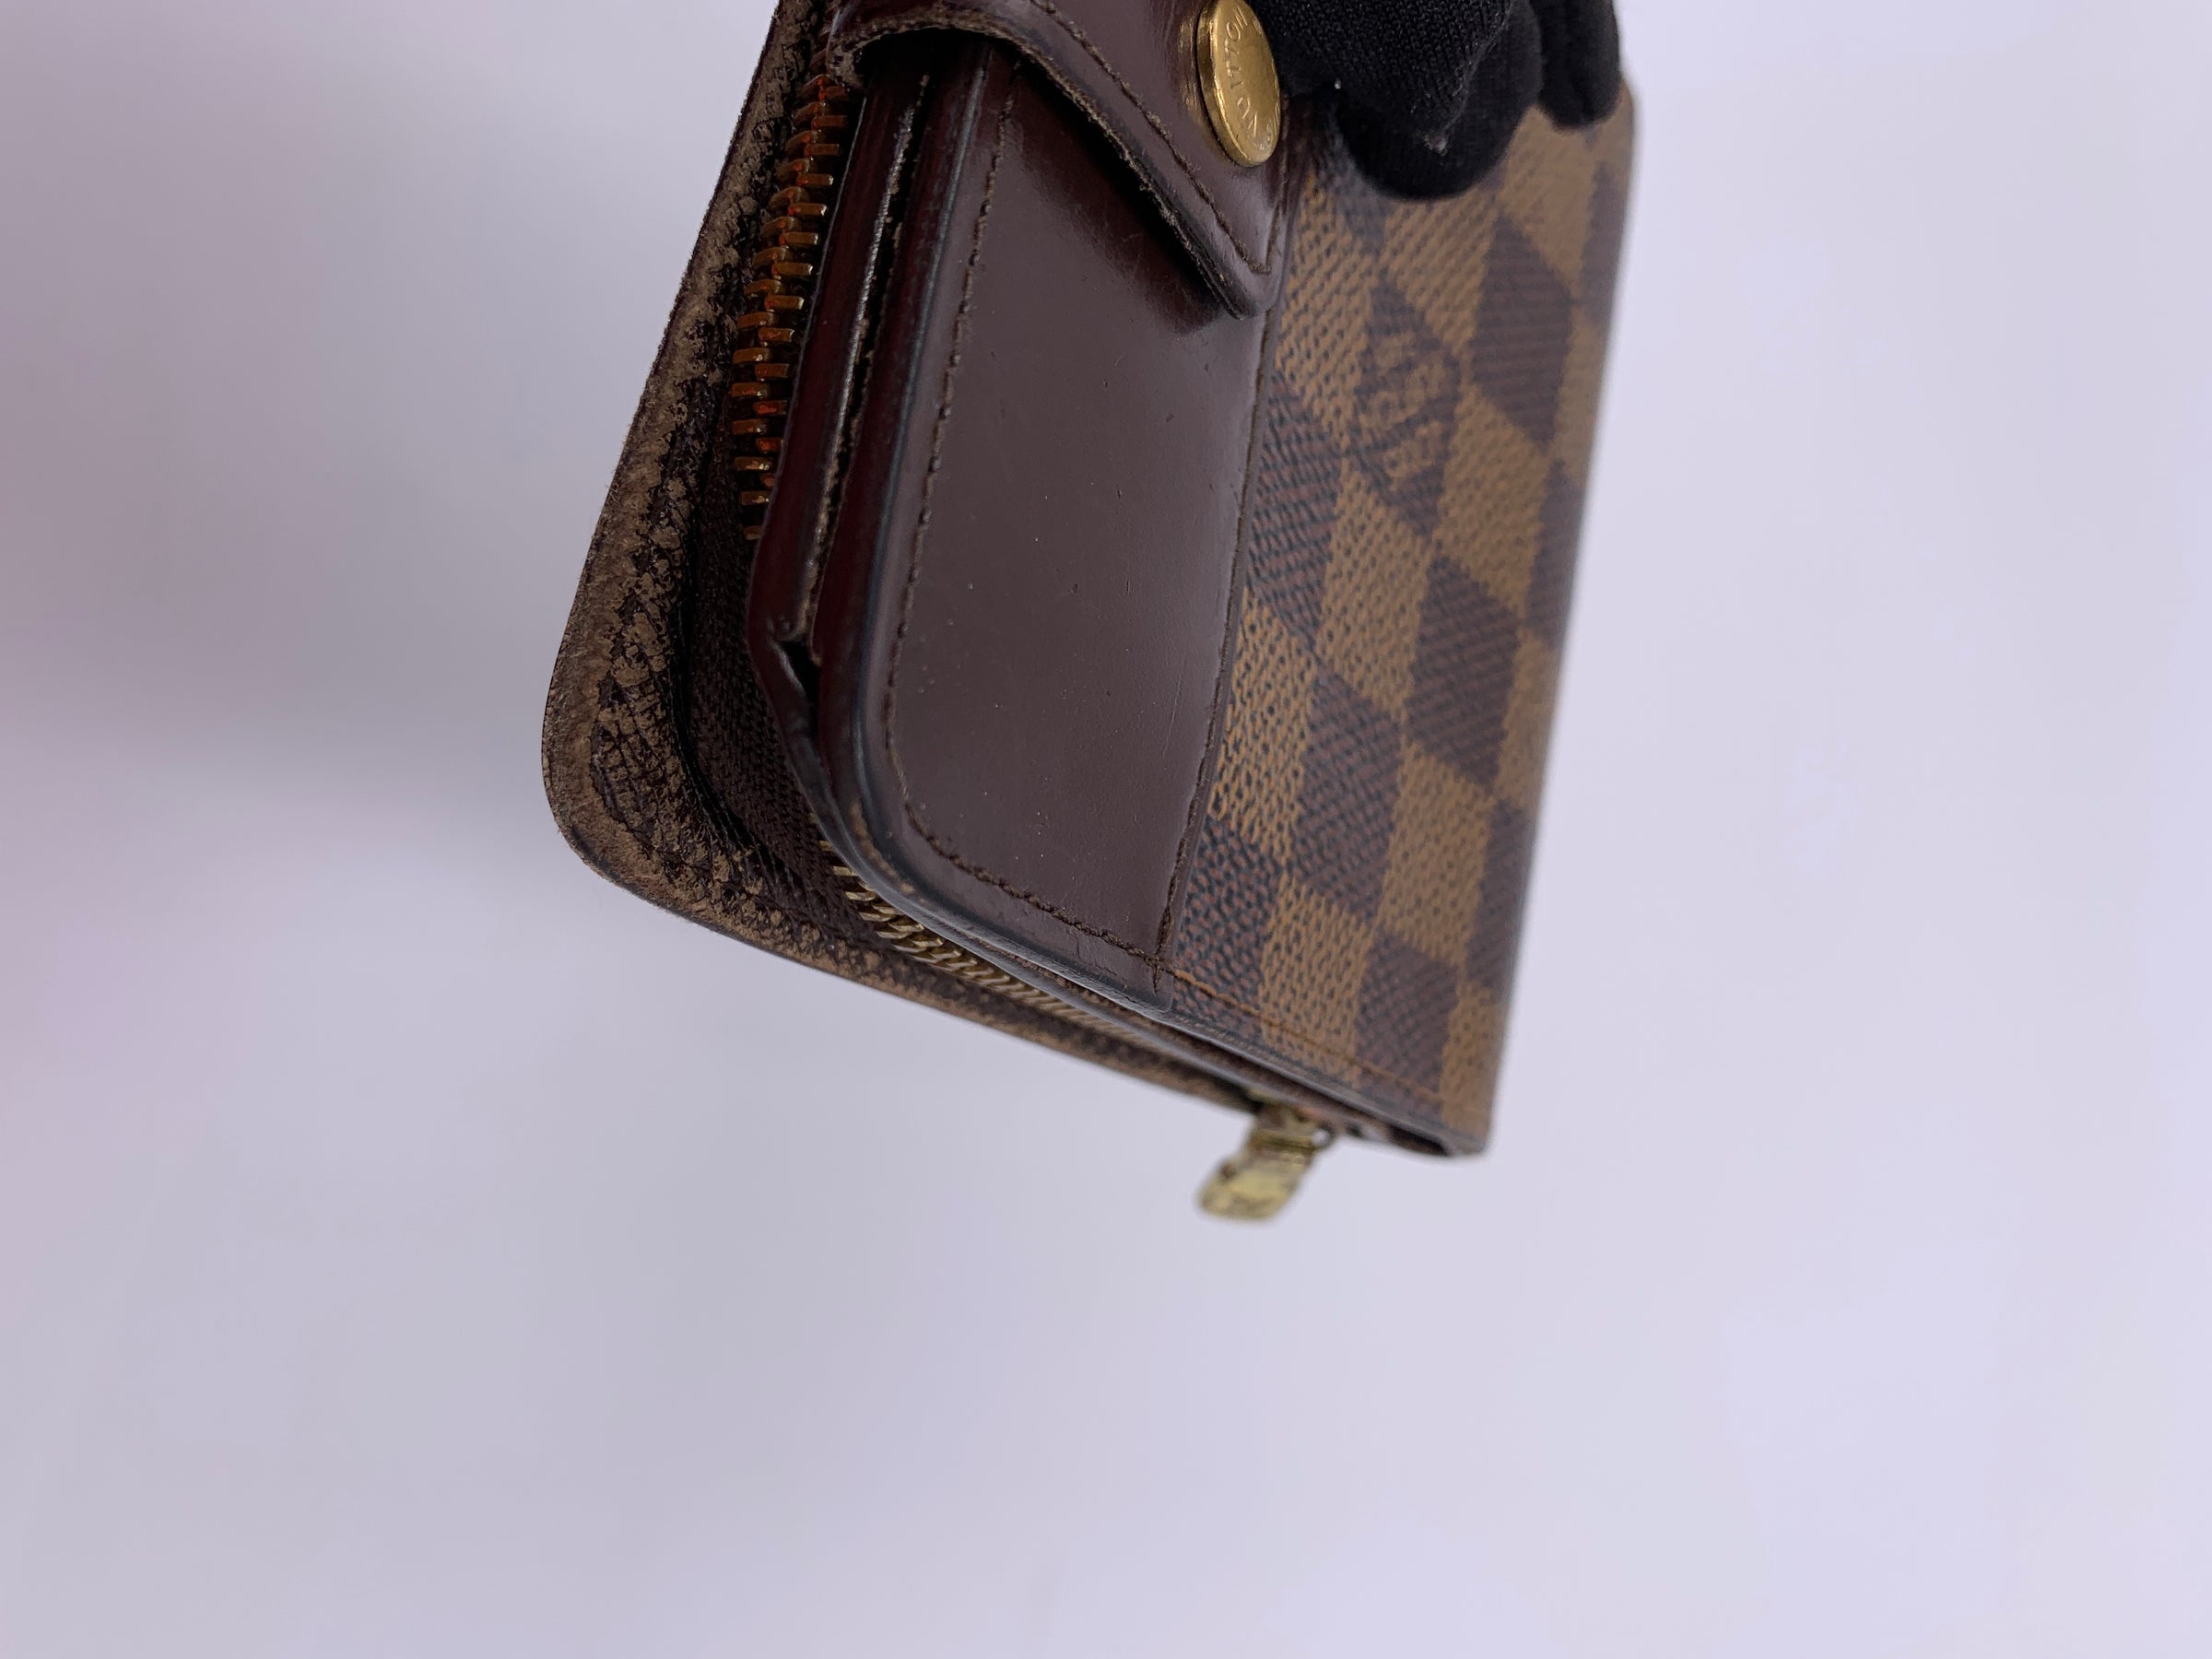 Clémence Wallet Damier Ebene - Wallets and Small Leather Goods